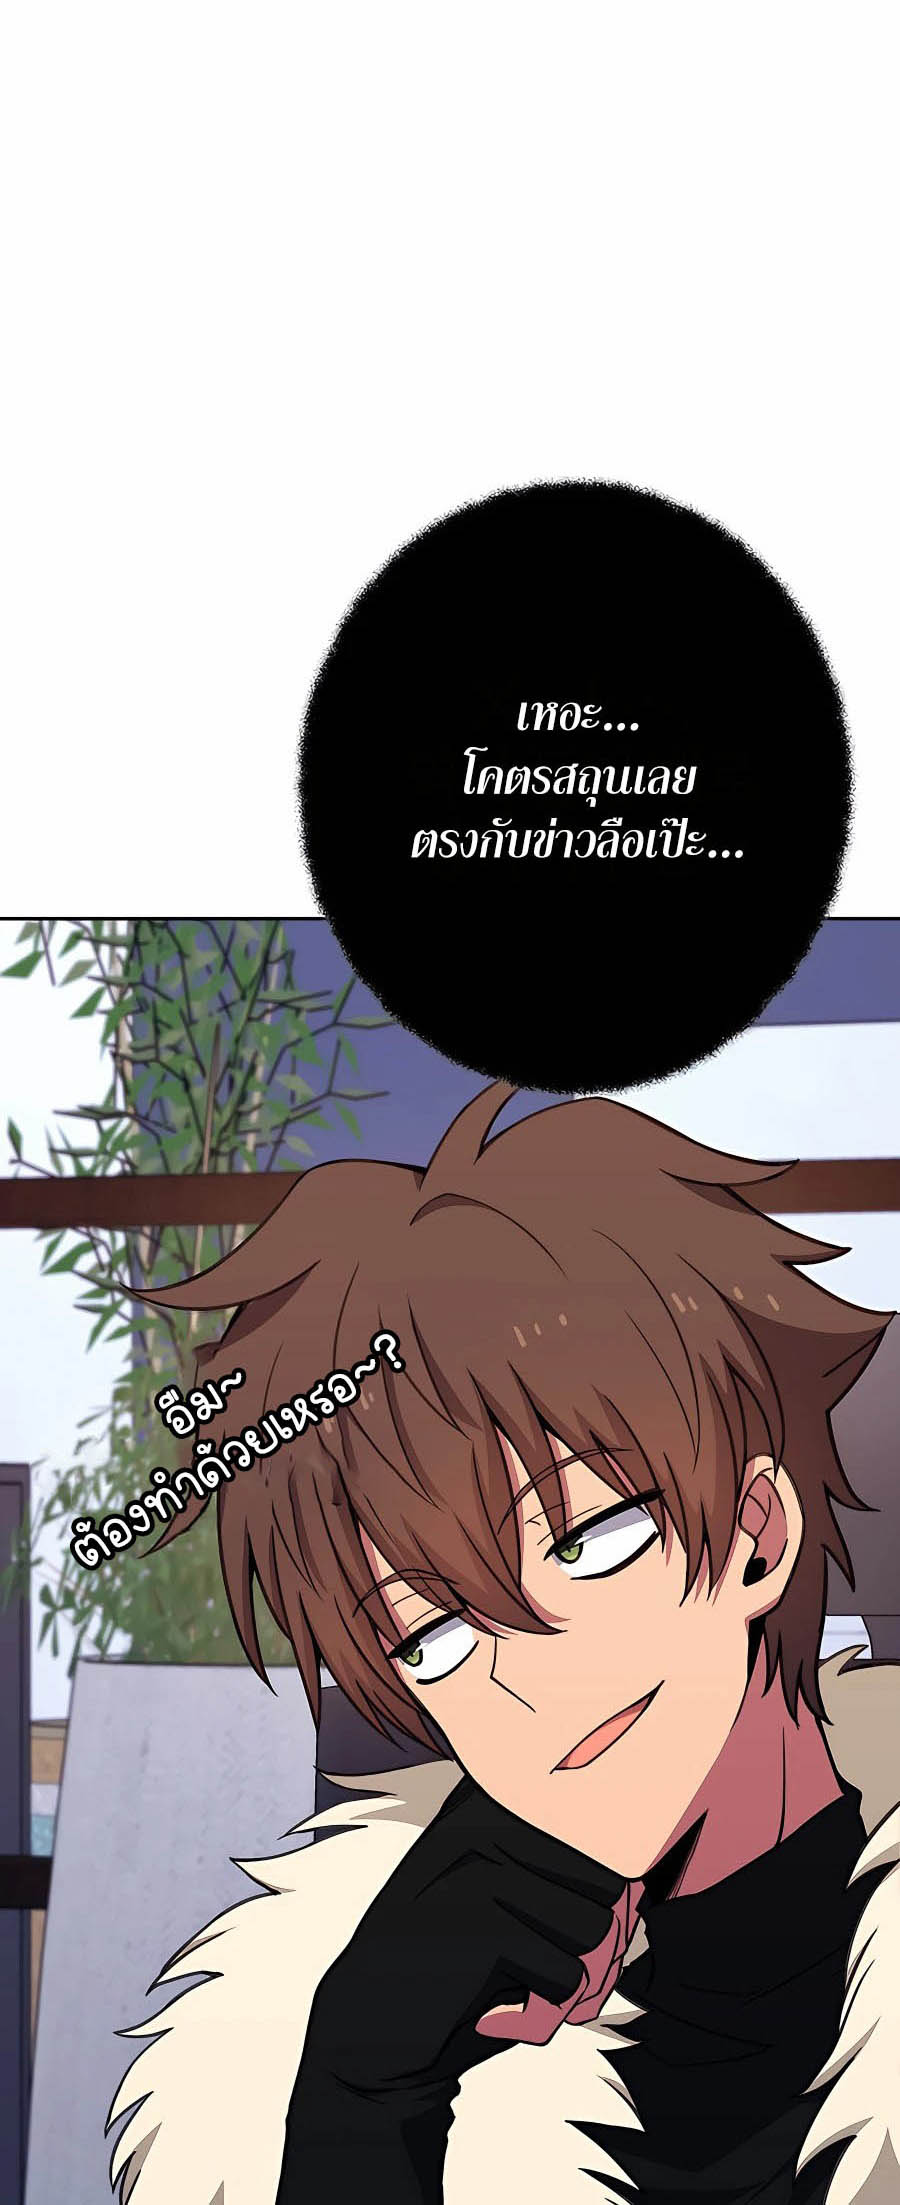 à¸­à¹ˆà¸²à¸™à¸¡à¸±à¸™à¸®à¸§à¸² à¹€à¸£à¸·à¹ˆà¸­à¸‡ The Part Time Land of the Gods 56 19